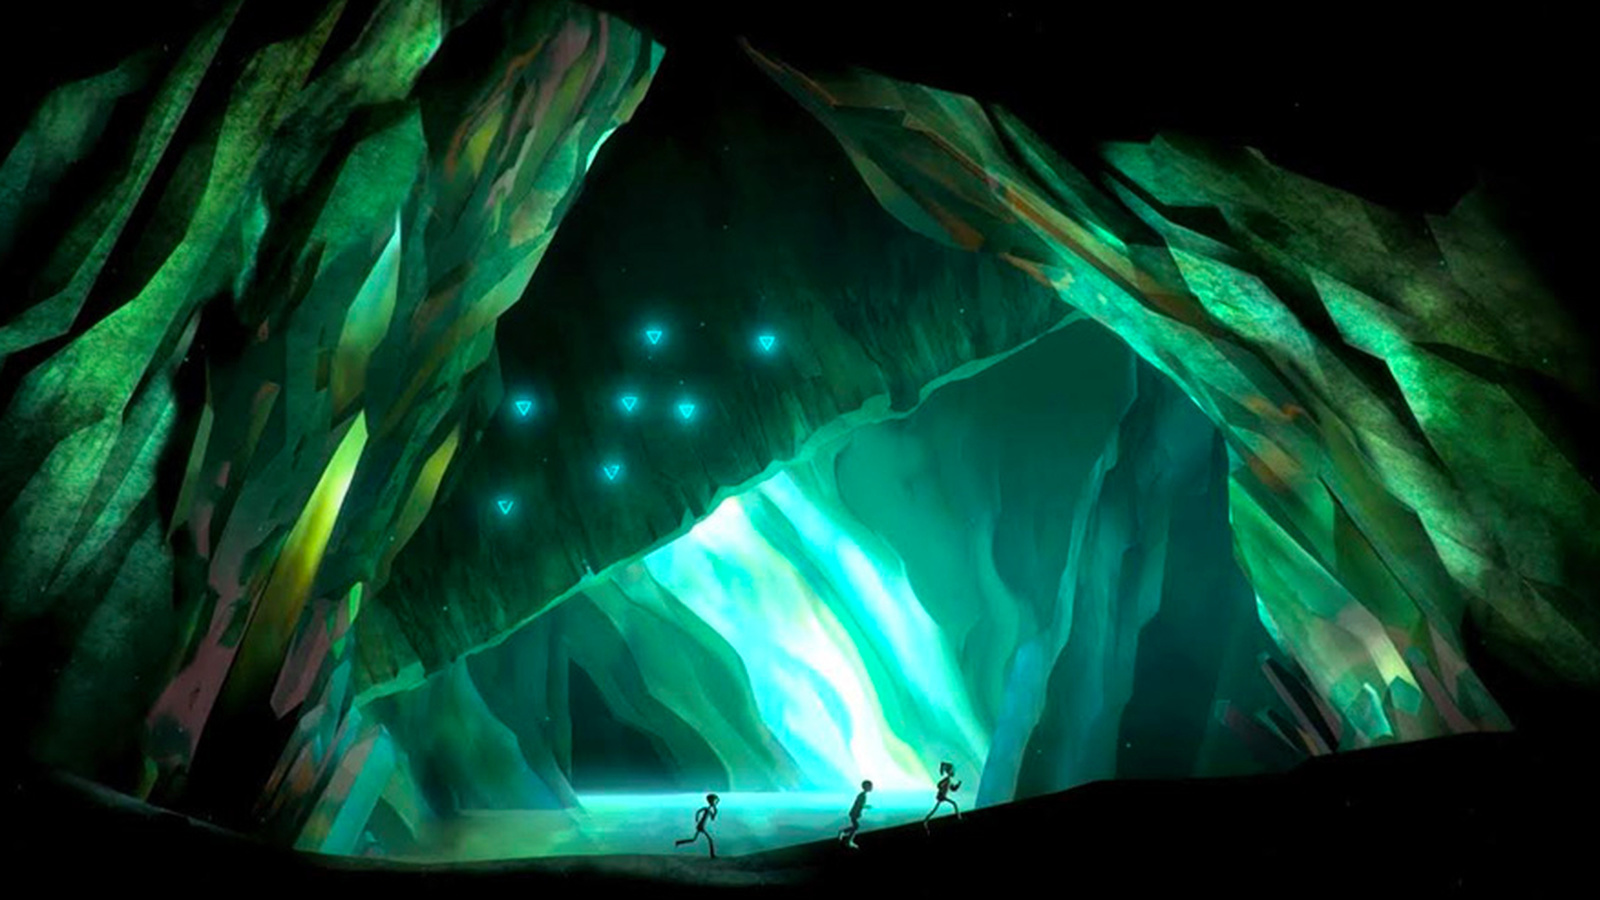 oxenfree explained